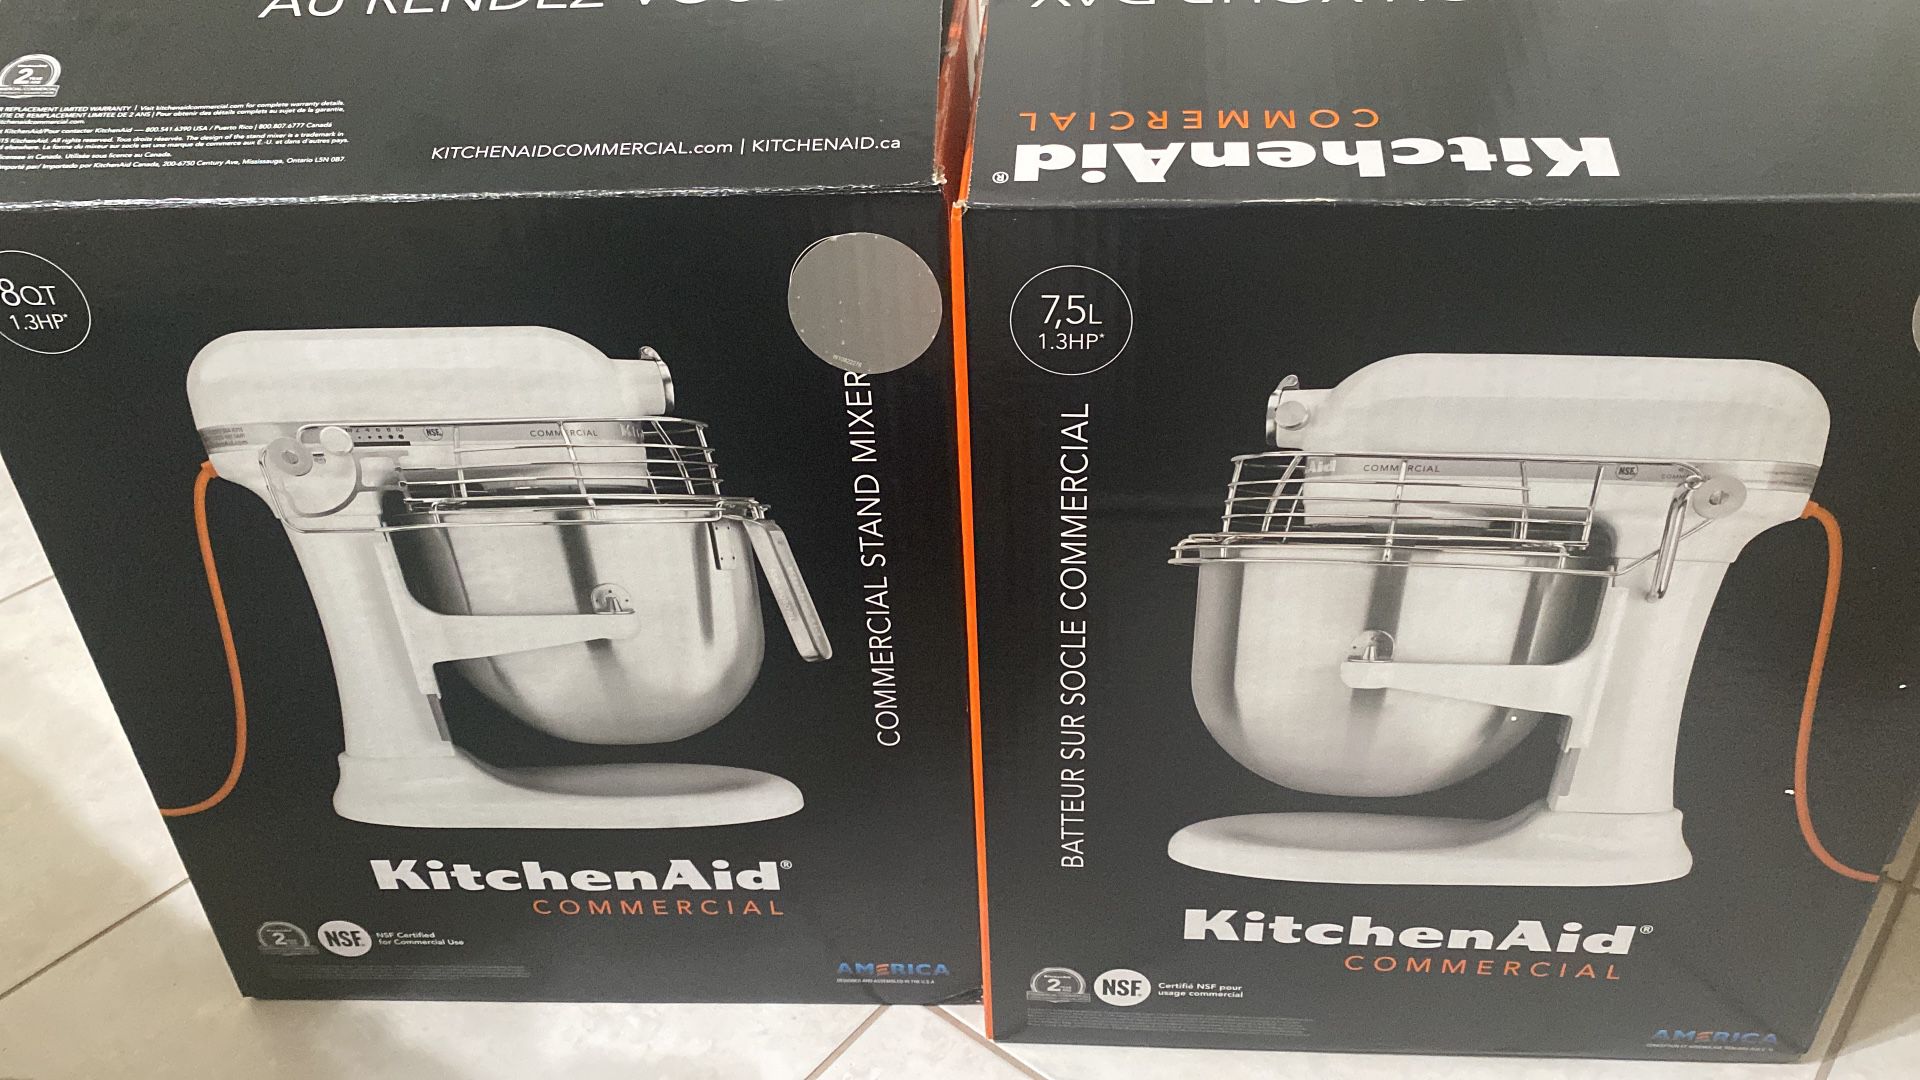 KitchenAid Commercial Countertop 10-Speed Stand Mixer 8-Quart Bowl Lift  with Stainless Steel Bowl Guard (KSMC895NP), 120 Volts, NSF Certified for  Comm for Sale in Sunny Isles Beach, FL - OfferUp